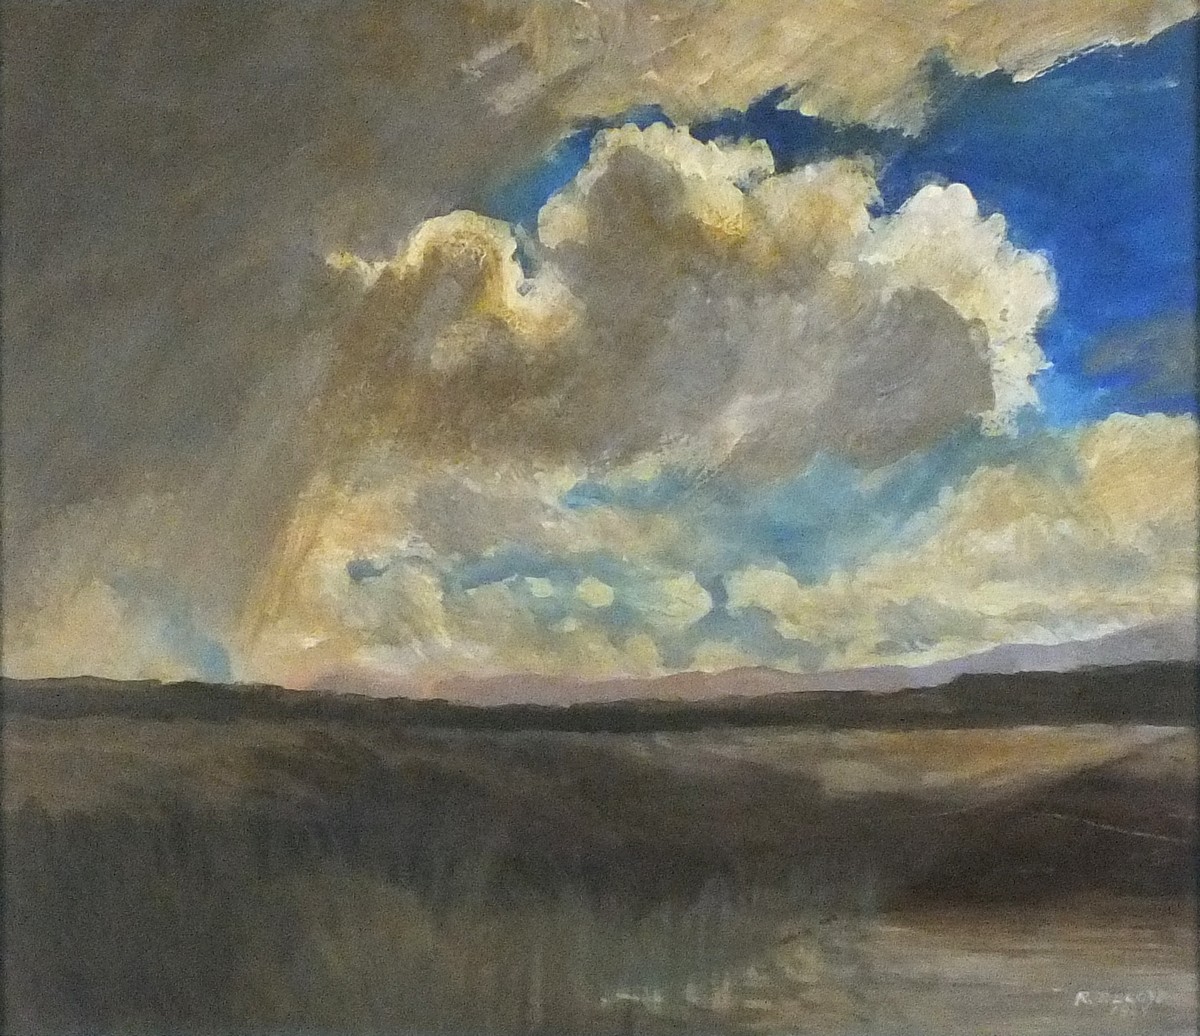 Reginald James LLOYD (British 1926-2020) Dartmoor Cloud, Oil on board, Signed and dated 1963 lower